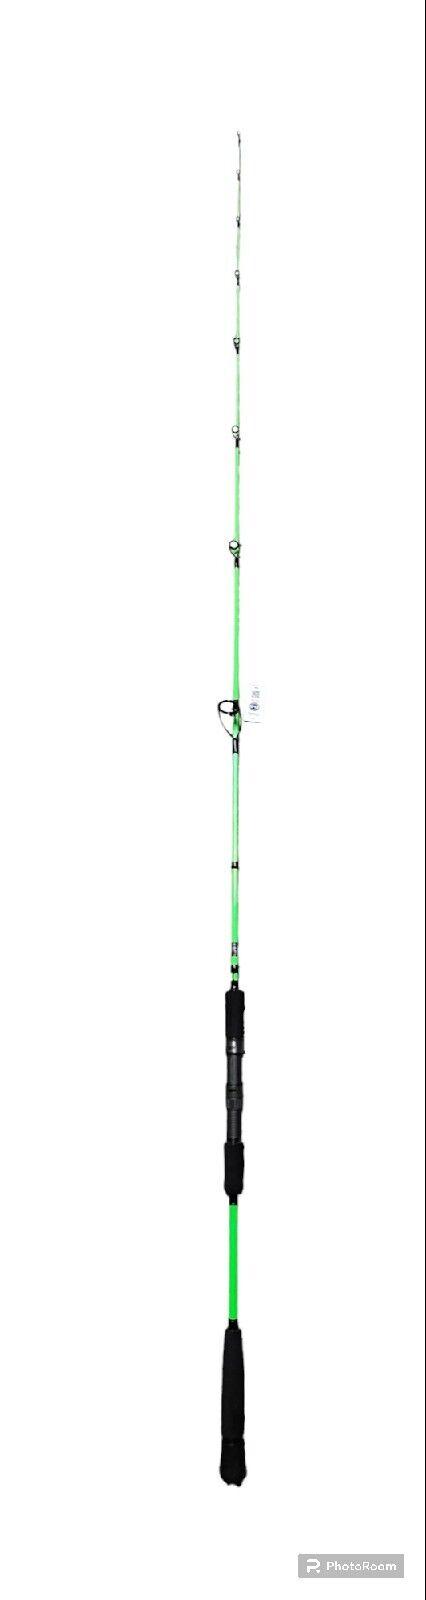 M3Tackle Carbon Drag-On Inshore Spinning Rod M3D701-MLF 7" 17-35lbs 1/2-3oz Fuji